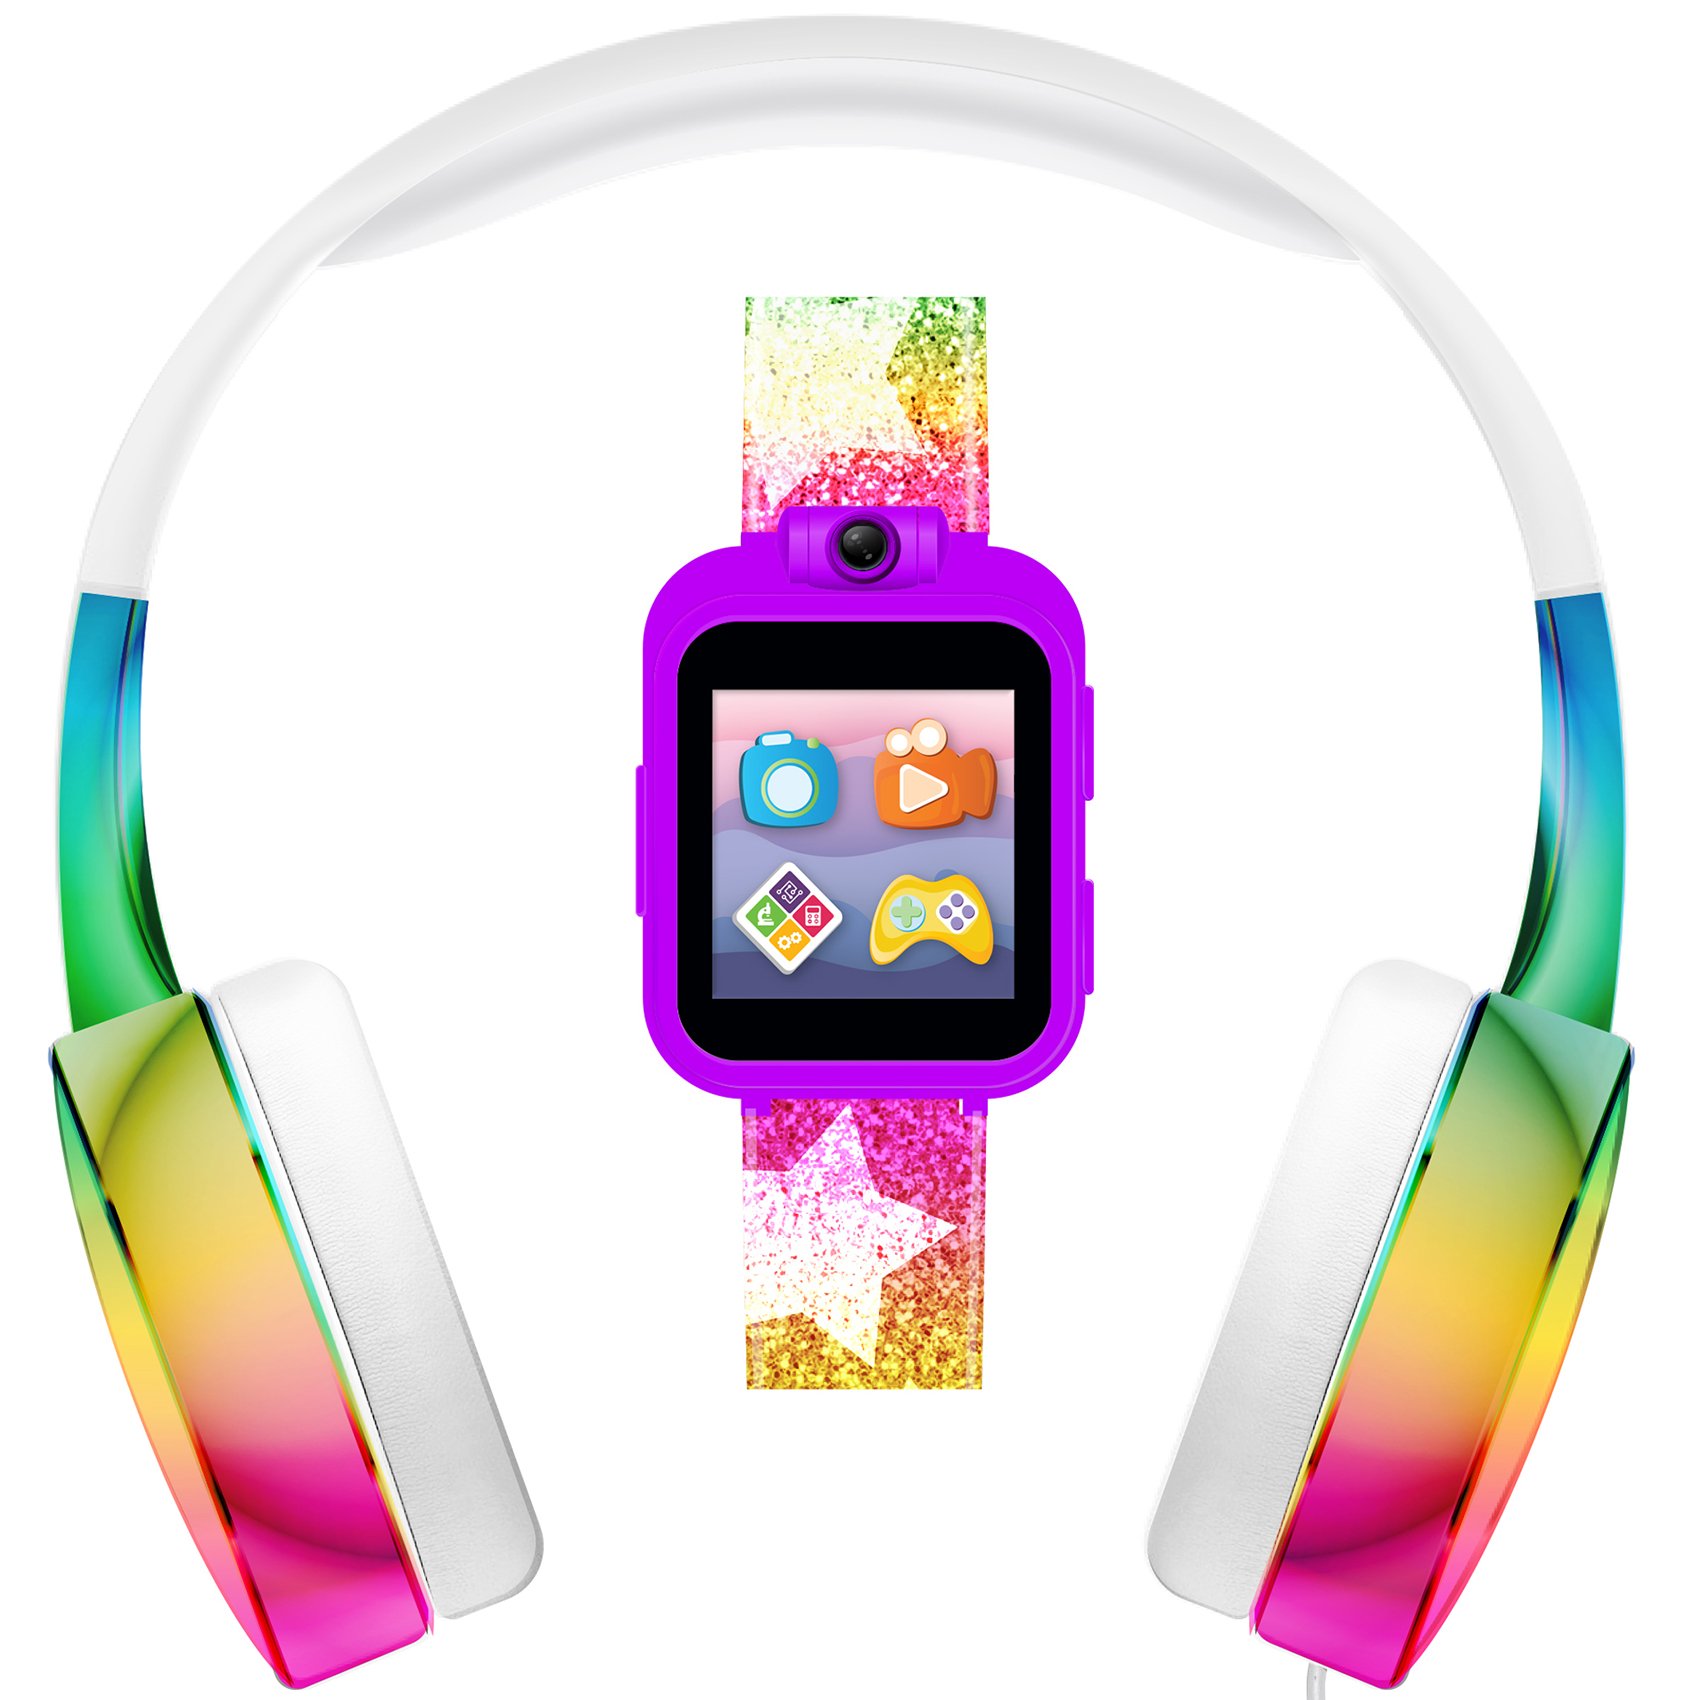 PlayZoom 2 Girls Headphones & Smartwatch Set (Multicolor Glitter Star) $20 + Free Store Pickup at Walmart or Free Shipping w/ Walmart+ or on $35+